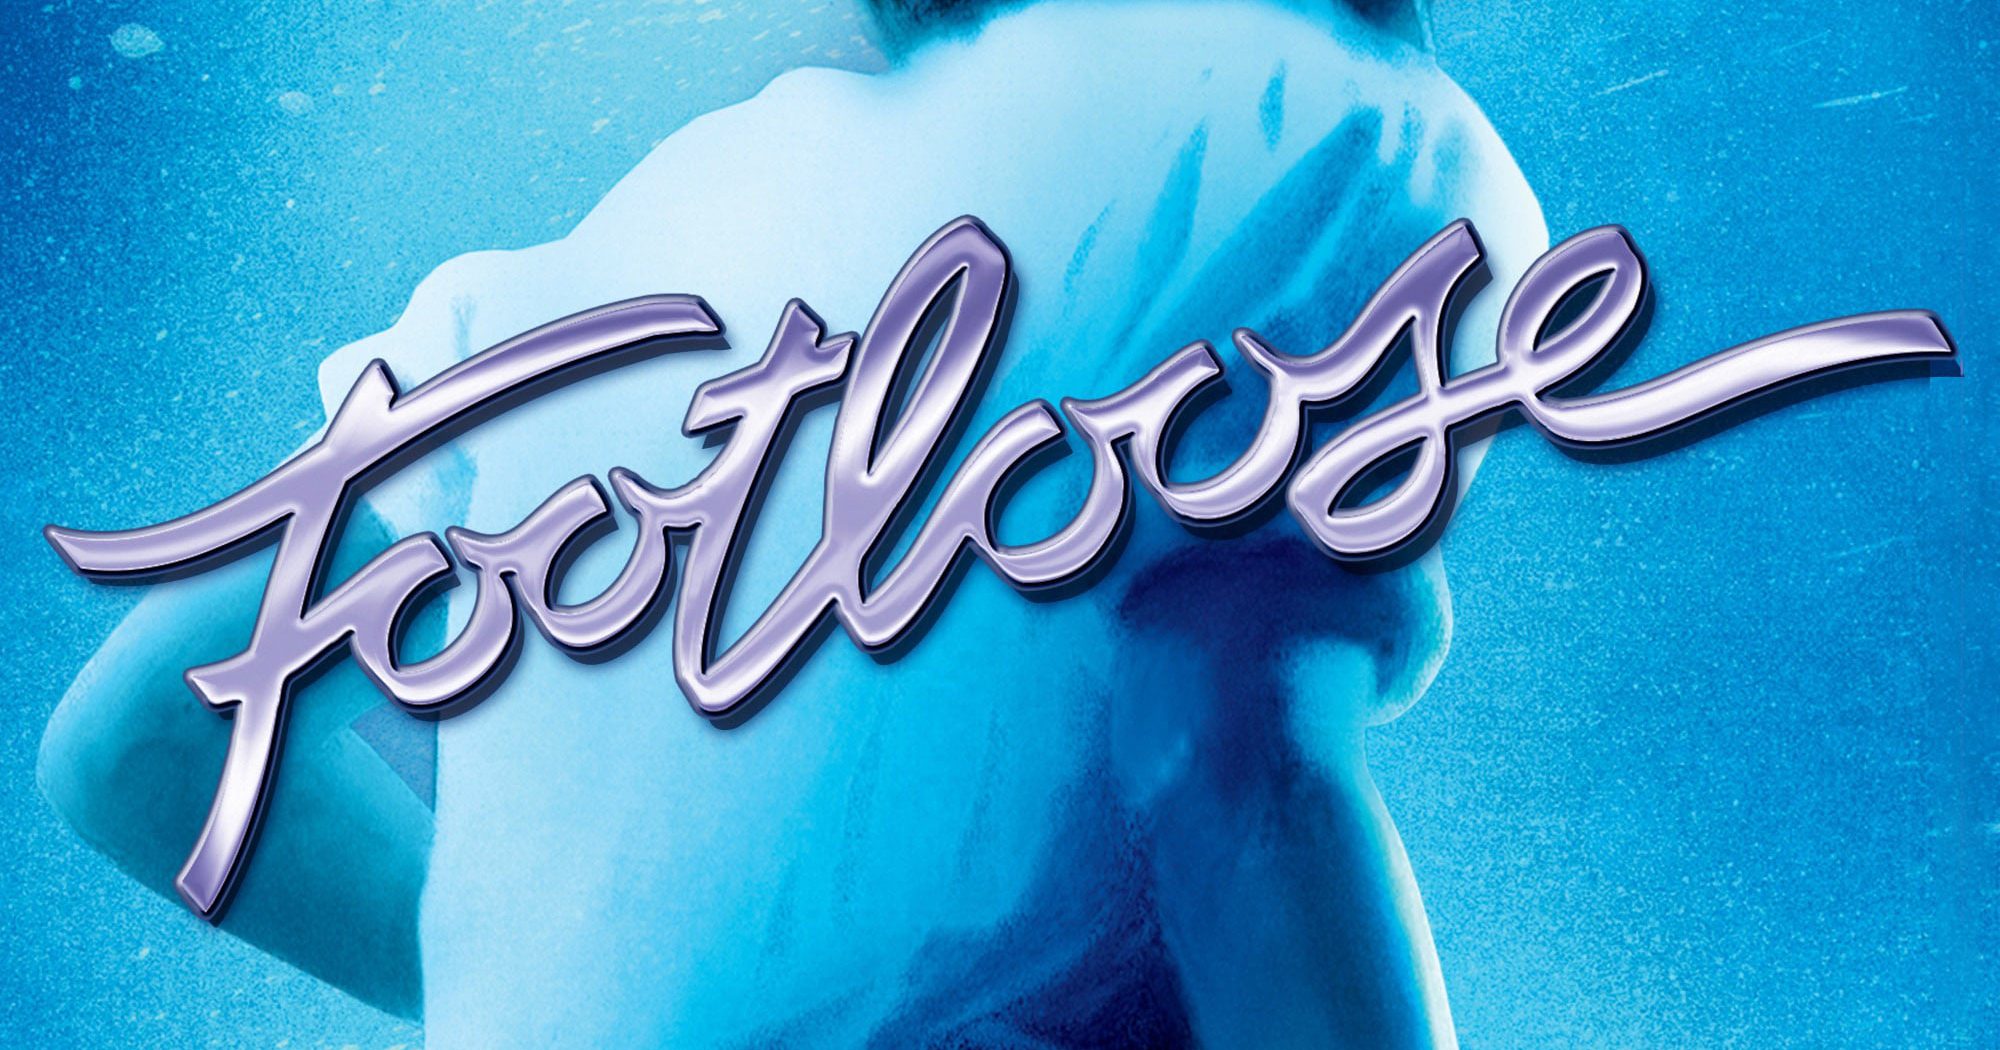 Poster for the movie "Footloose"